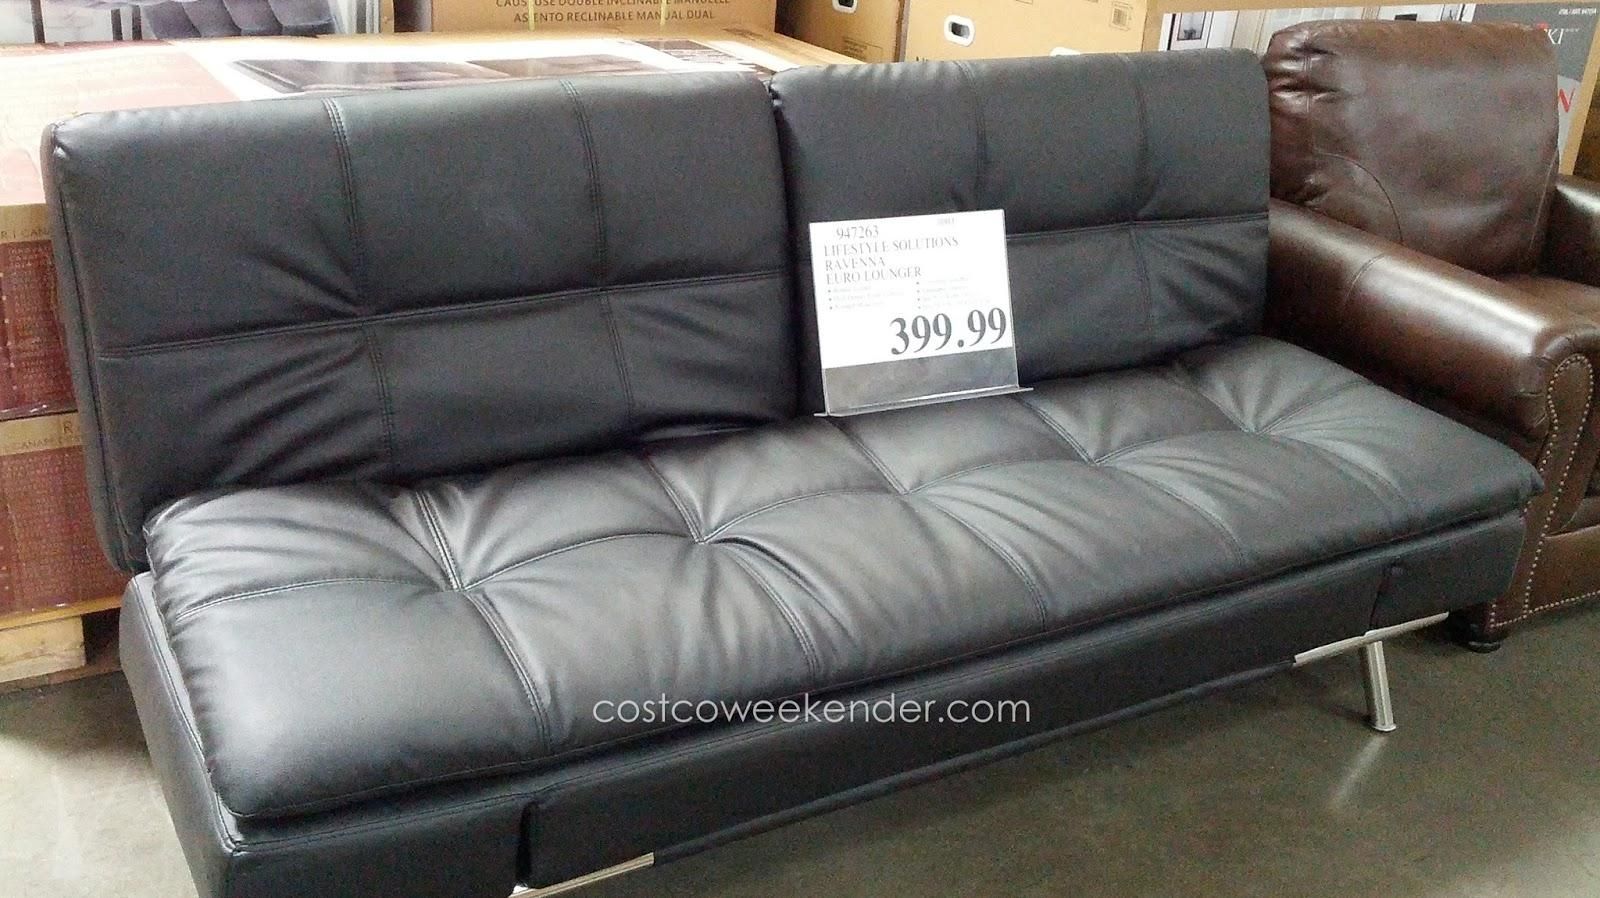 Furniture: Costco Modular Sofa | Sofa Bed At Costco | Couches At Regarding Sofa Lounger Beds (View 19 of 20)